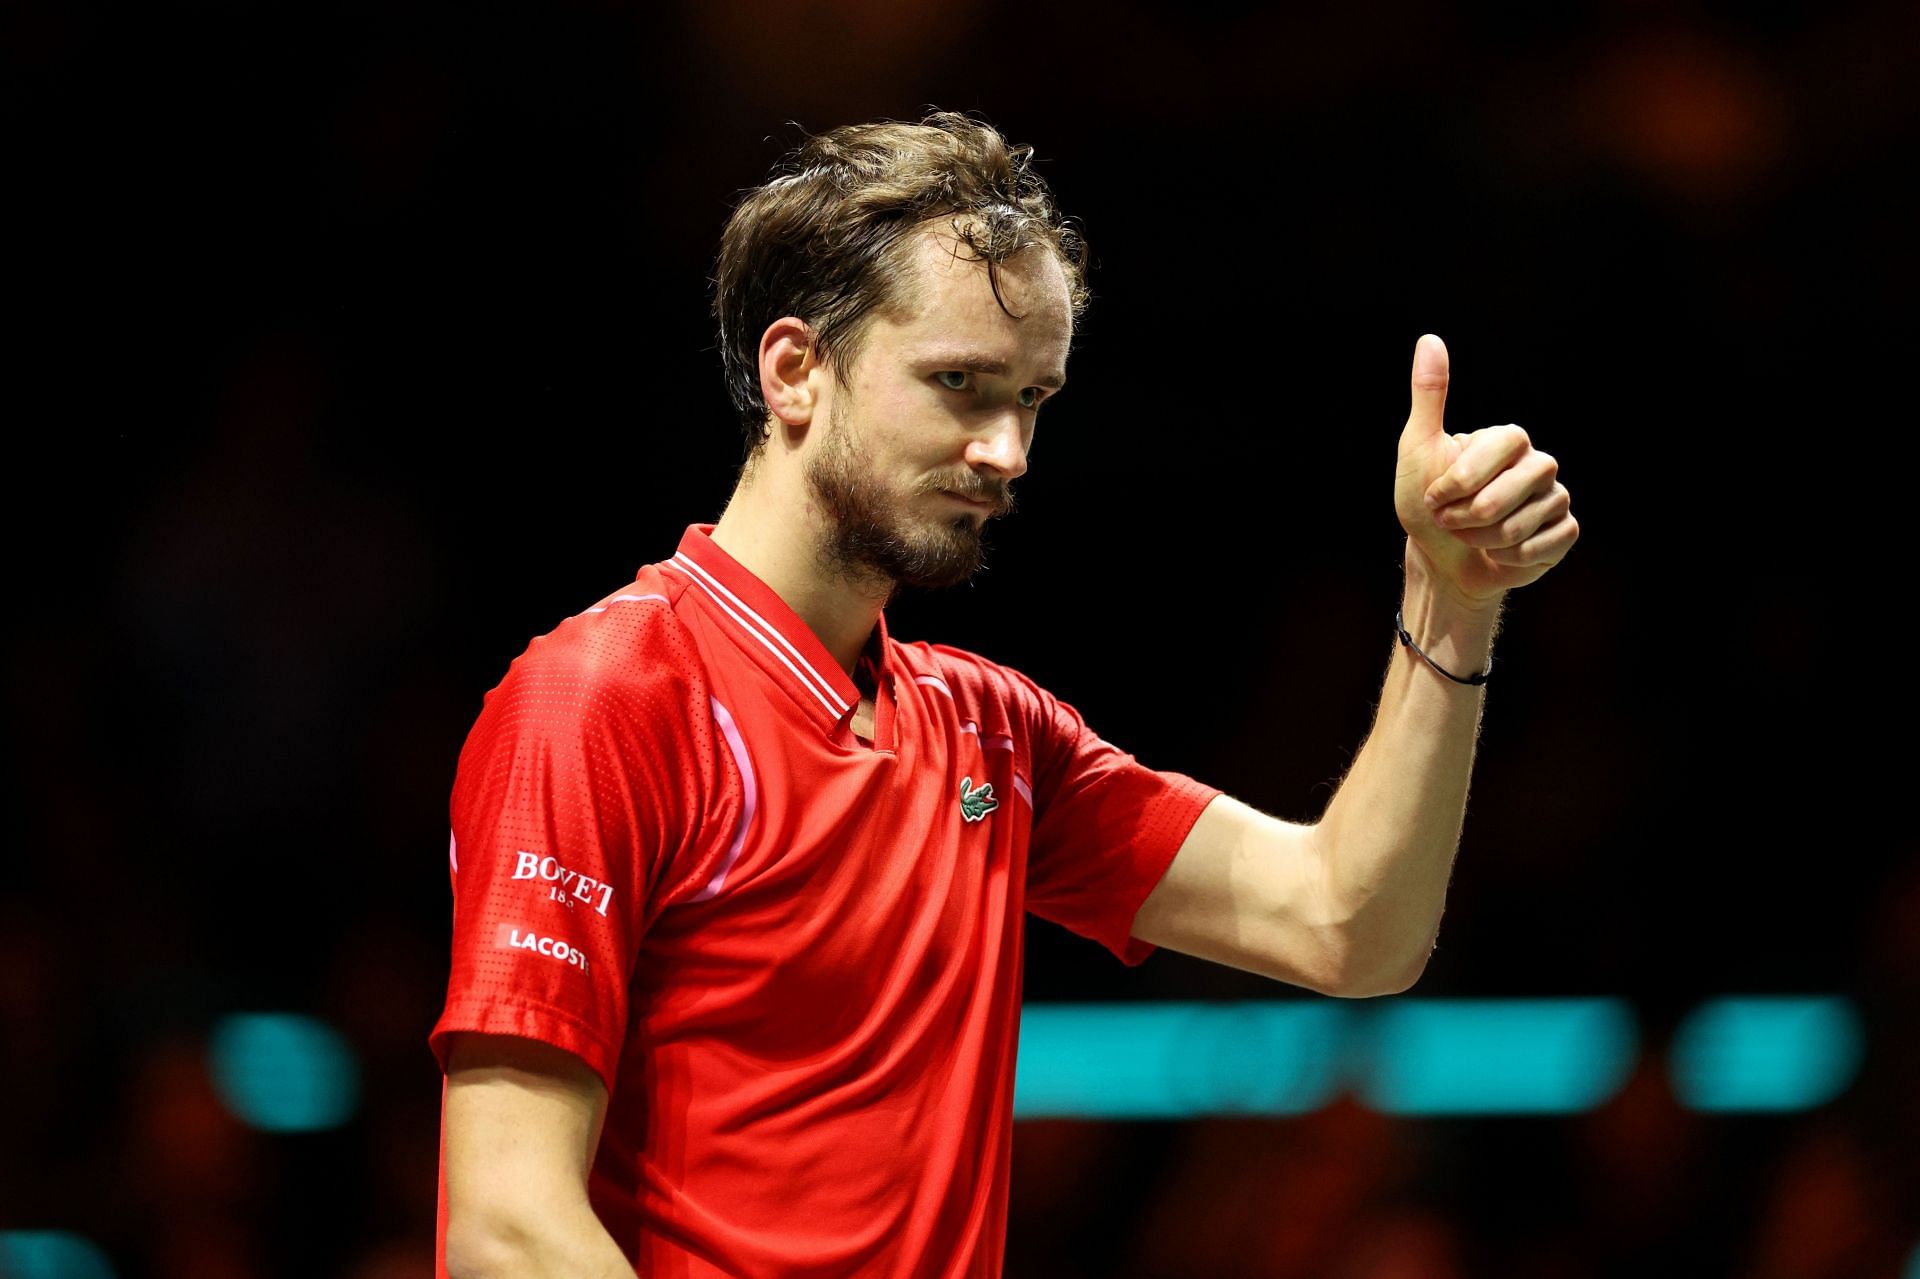 Daniil Medvedev pictured at the 50th ABN AMRO Open 2023 - Day 7.